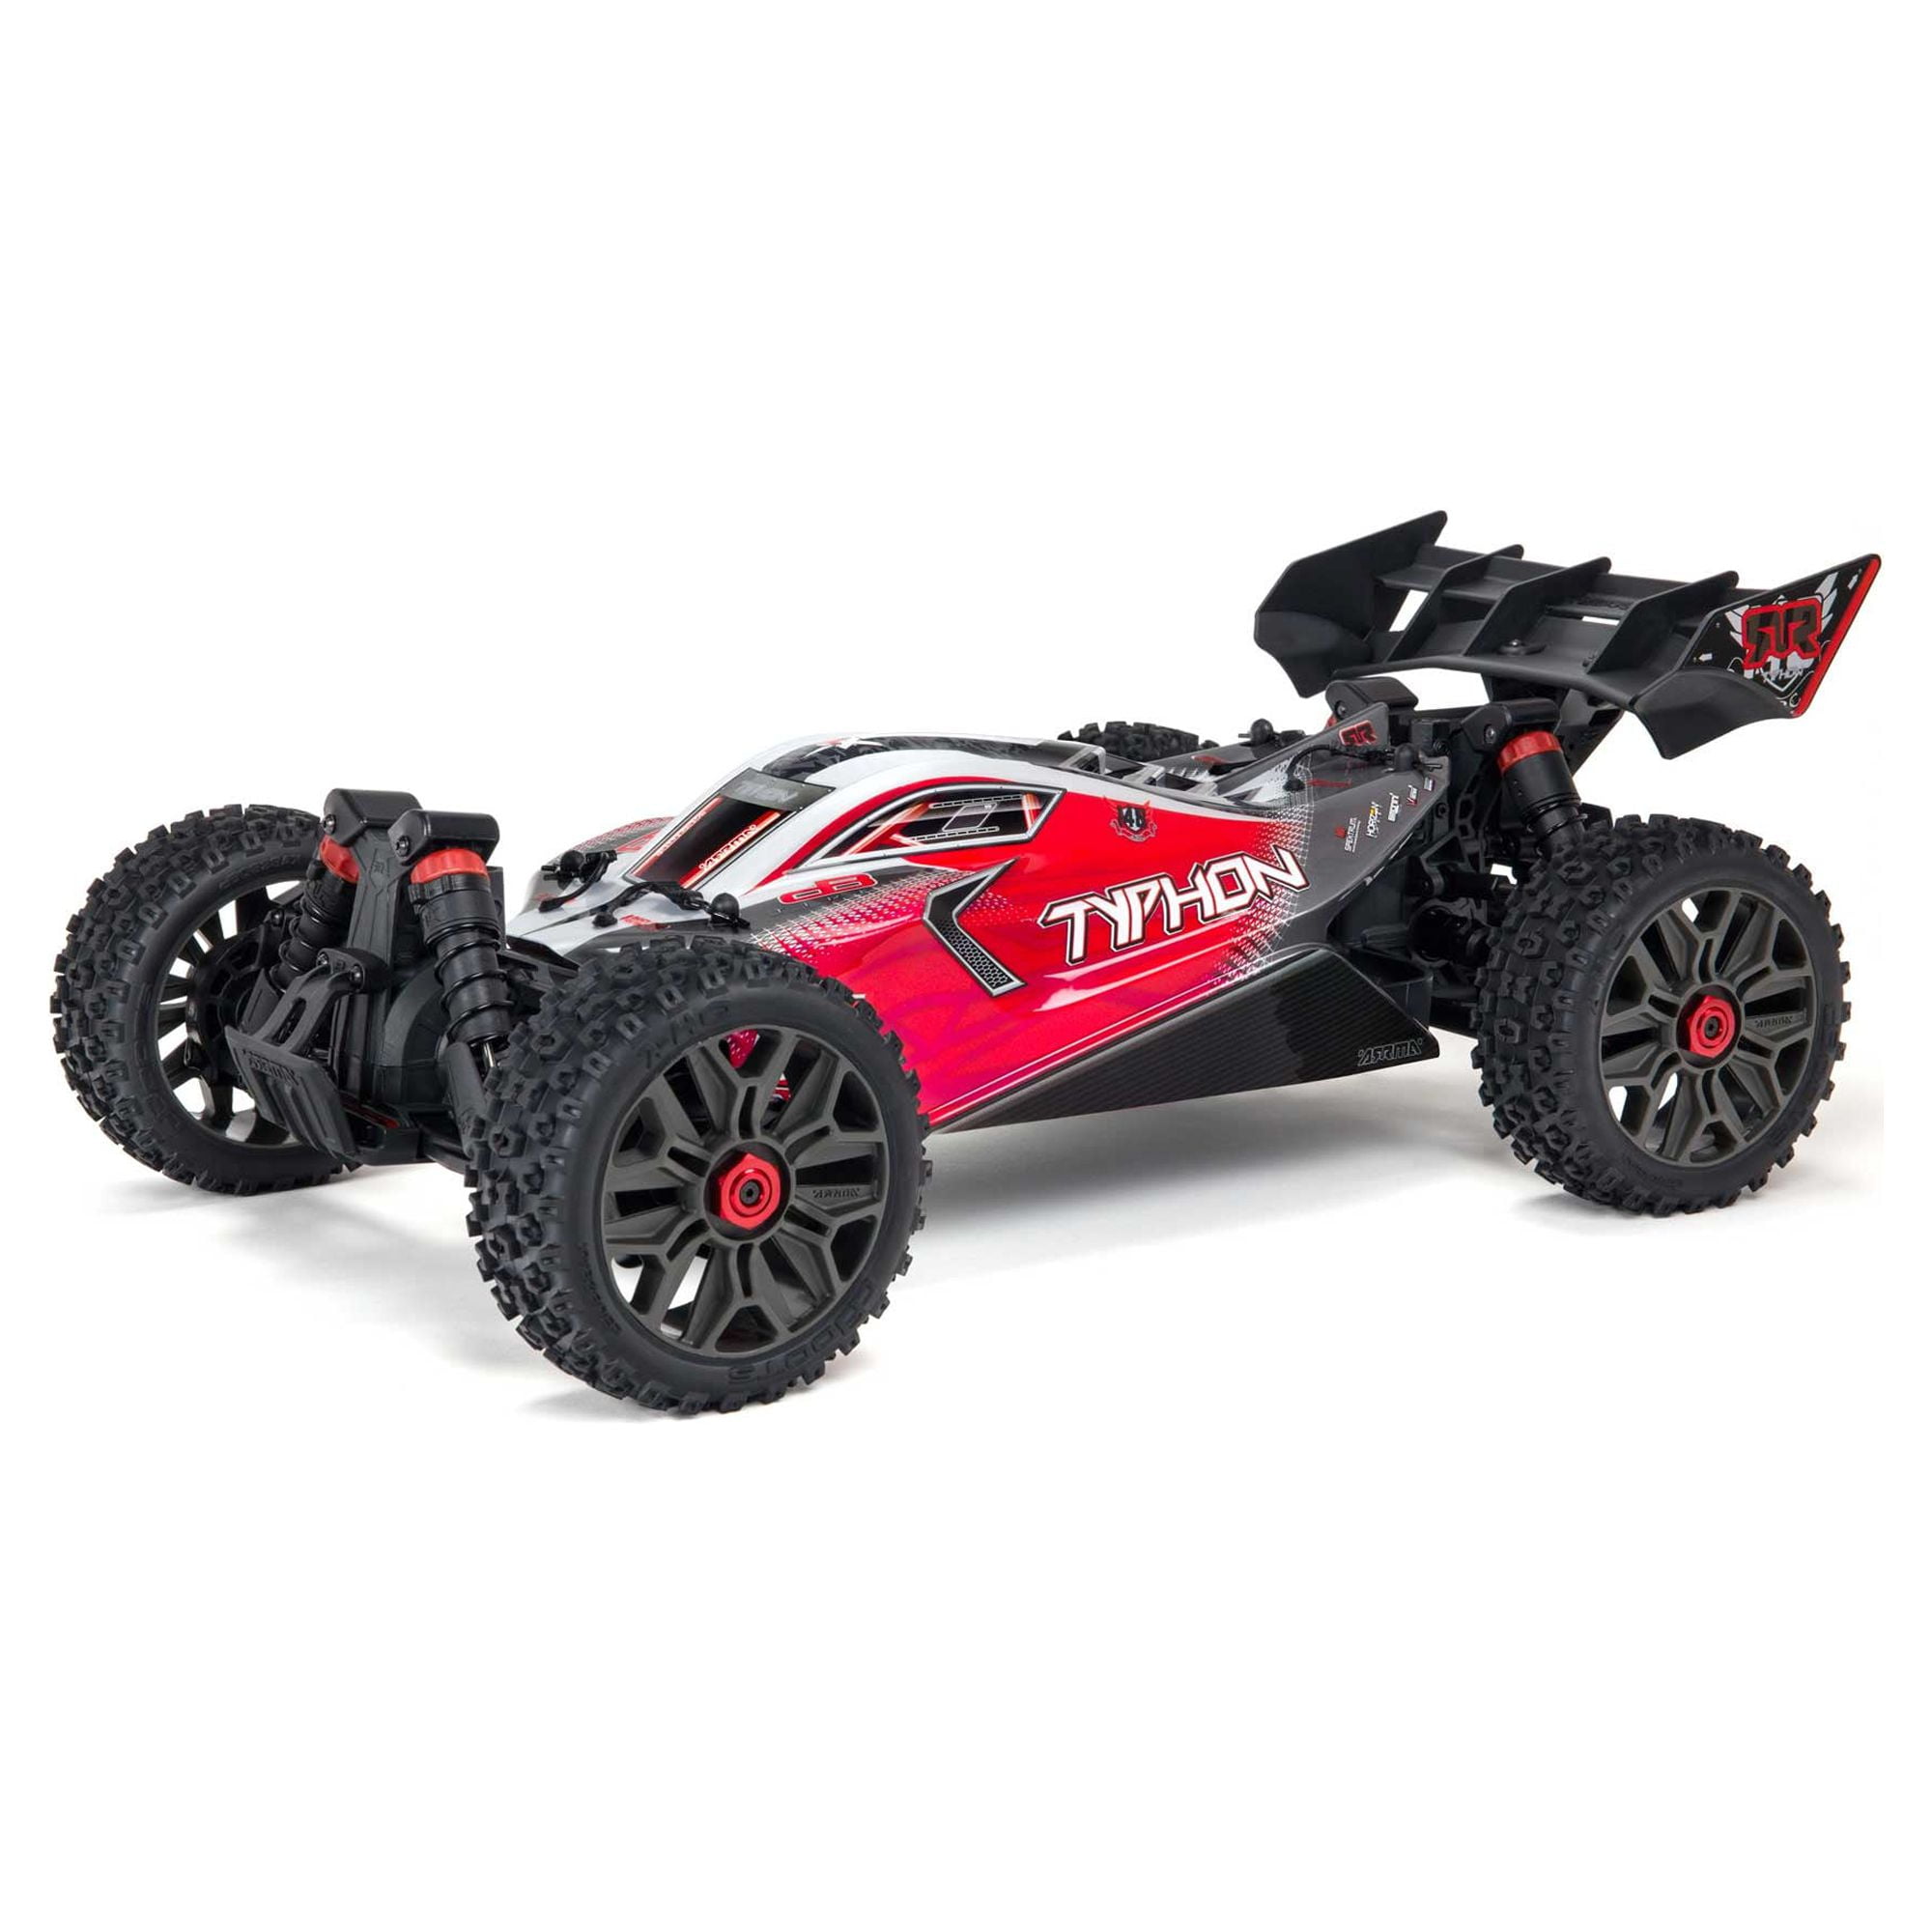 ARRMA RC Truck 1/10 GRANITE 4X4 V3 3S BLX Brushless Monster Truck RTR  Battery and Charger Not Included Green ARA4302V3T1 Trucks Electric RTR 1/10  Off-Road 